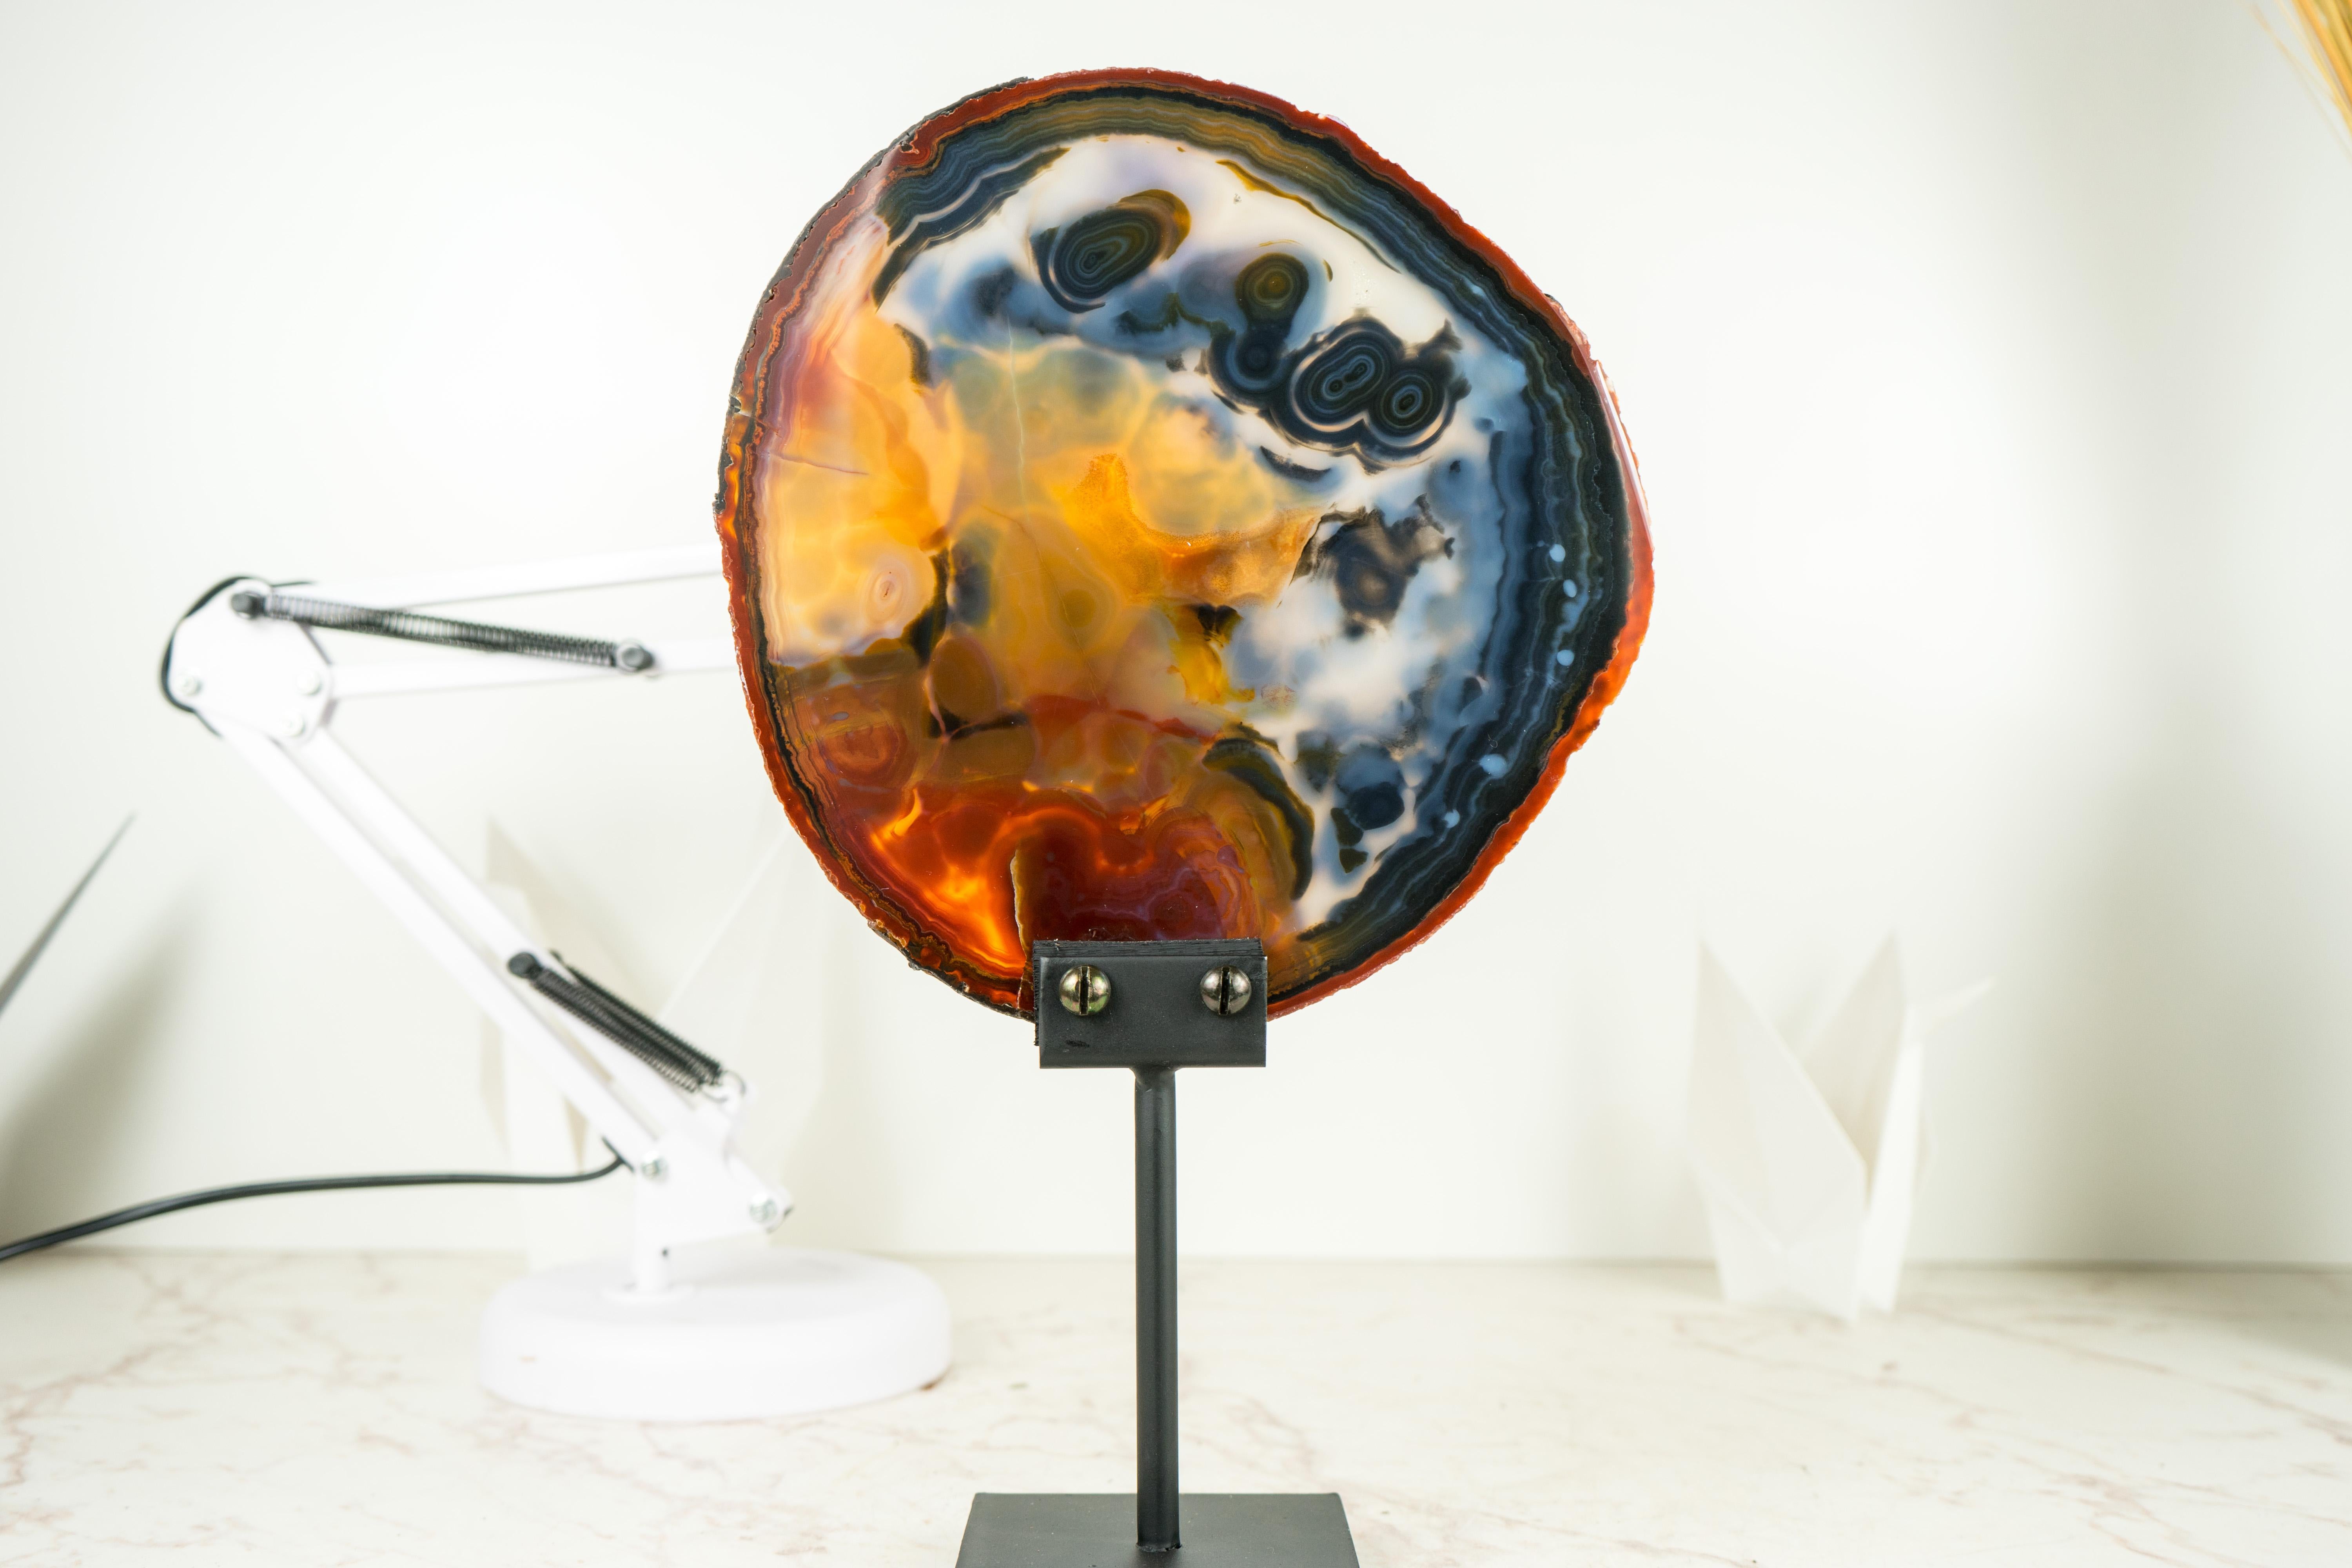 Natural Abstract Painted Agate Slice with Rare, One-Of-A-Kind Color Combination

▫️ Description

A natural masterpiece, this agate slice features bands in various shades of orange, red, yellow, and white, interspersed with occasional darker areas,